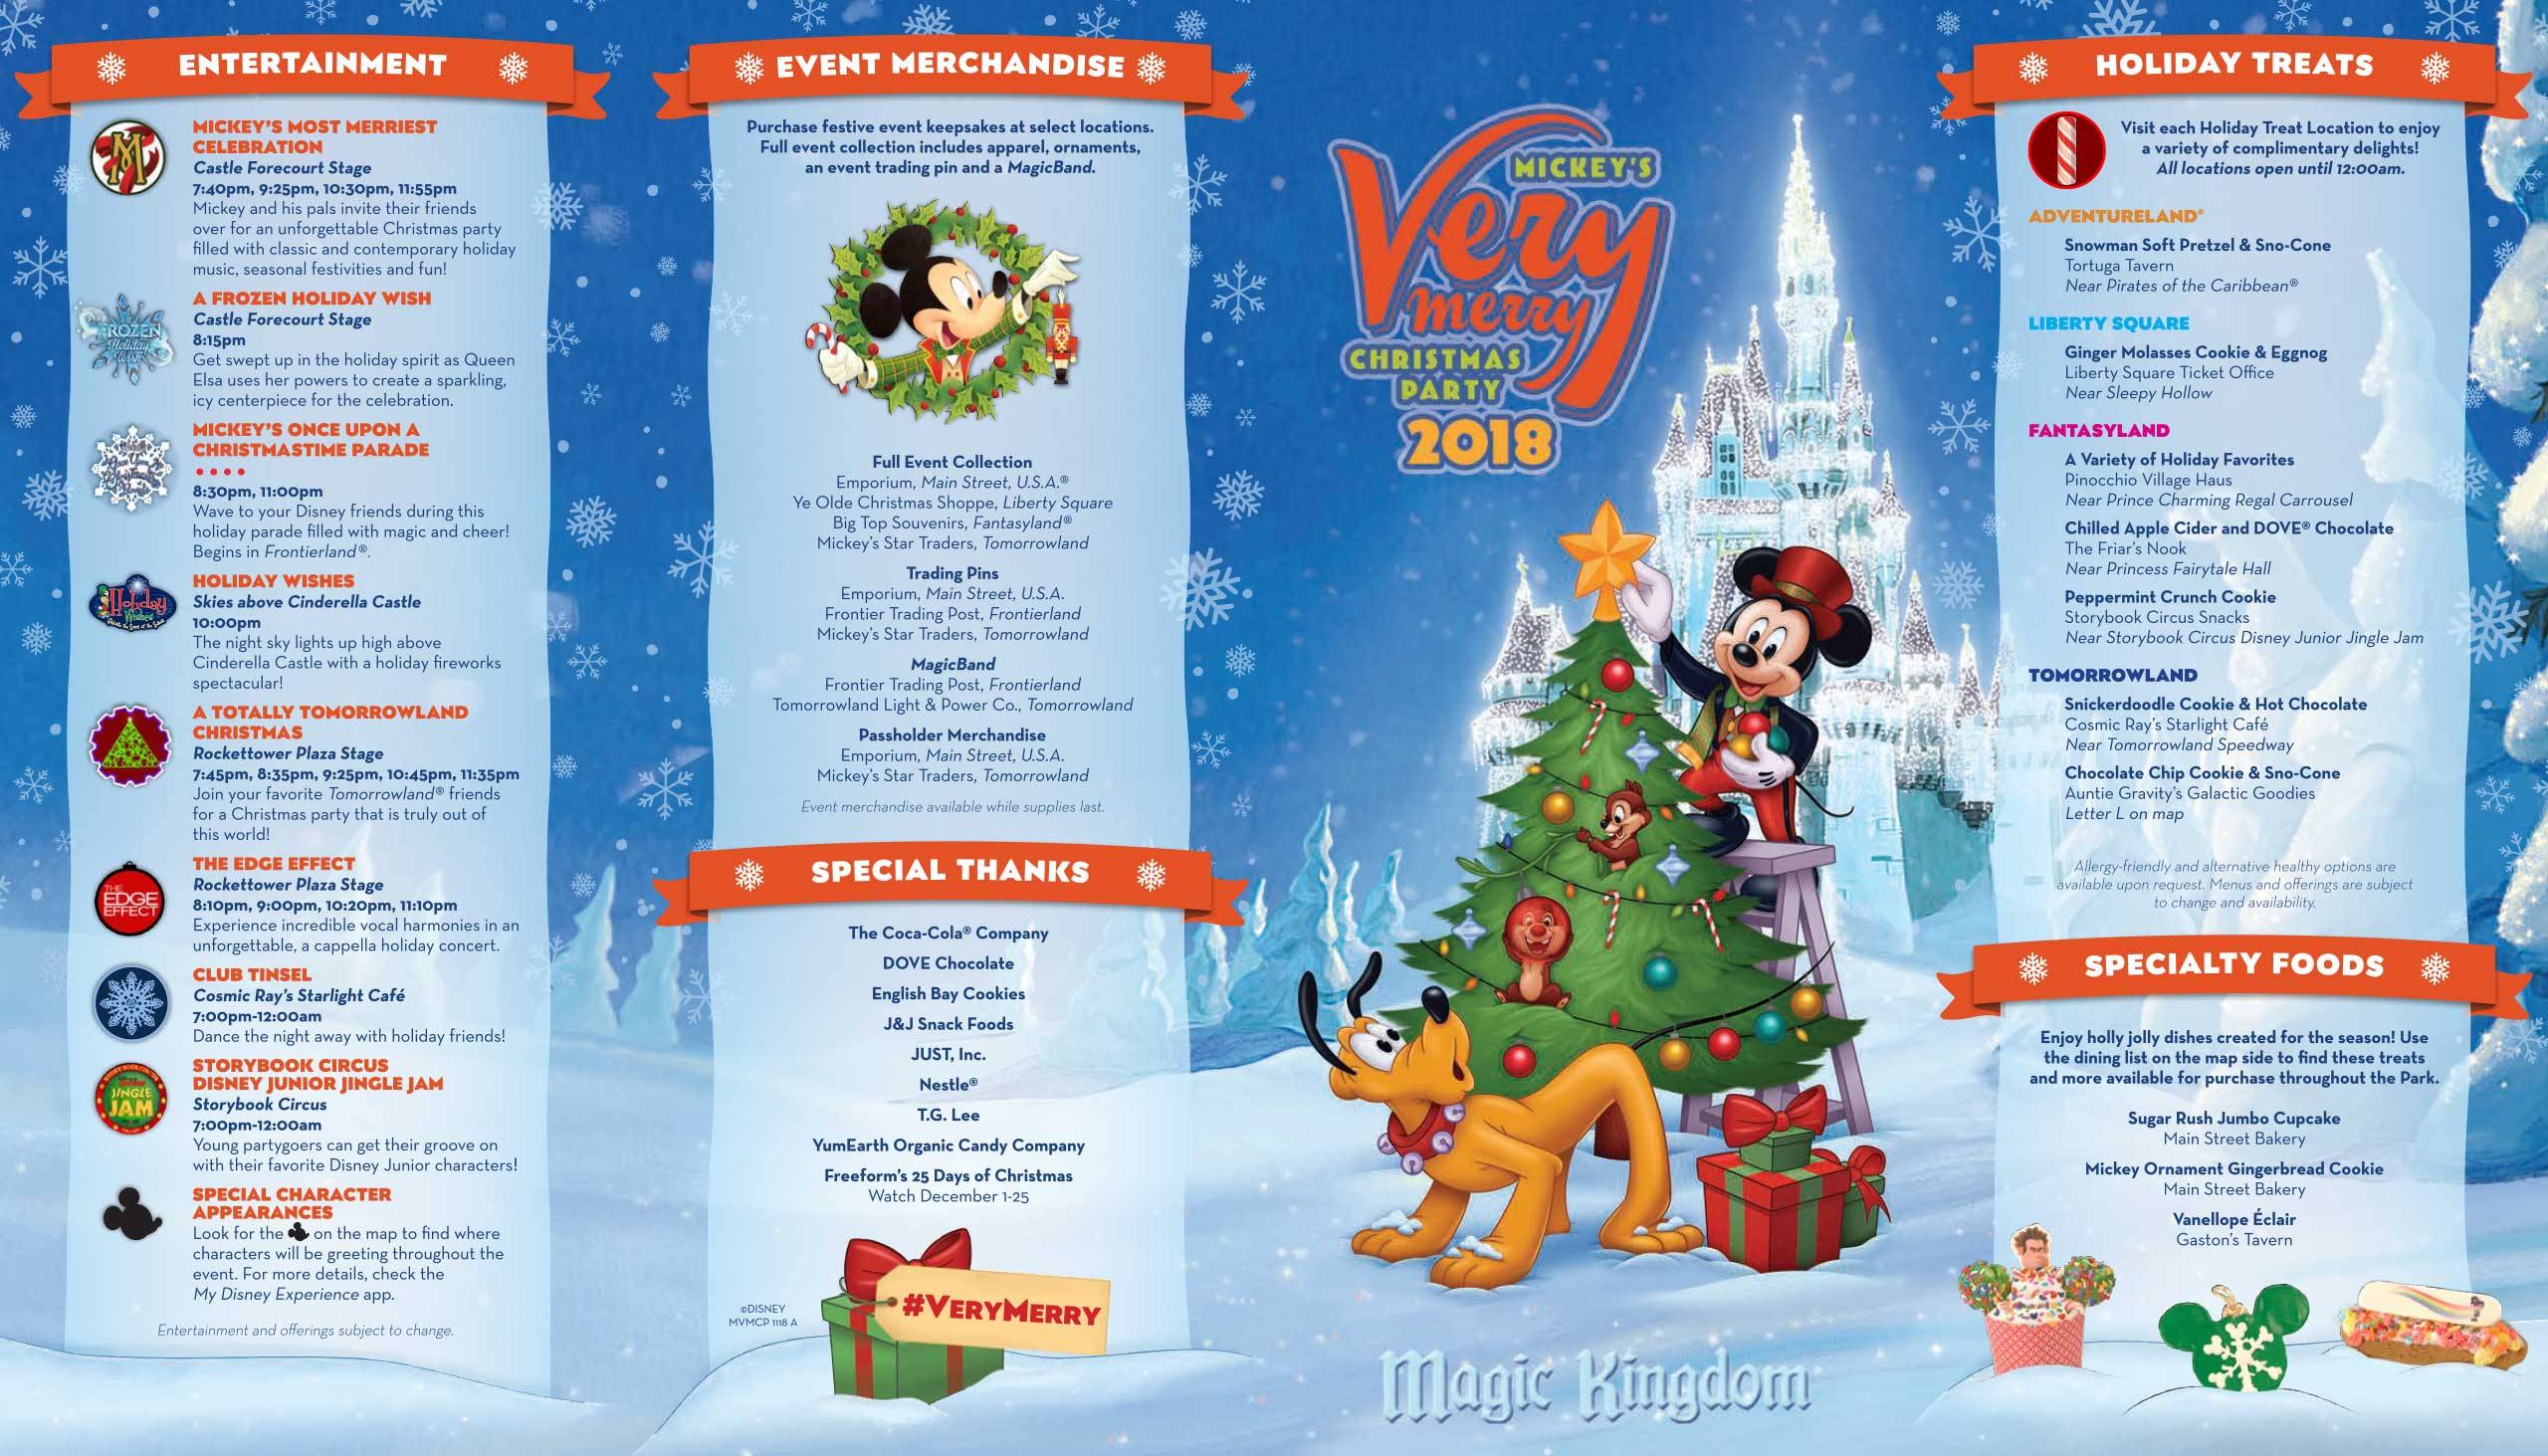 Mickey's Very Merry Christmas Party 2018 guide map - front